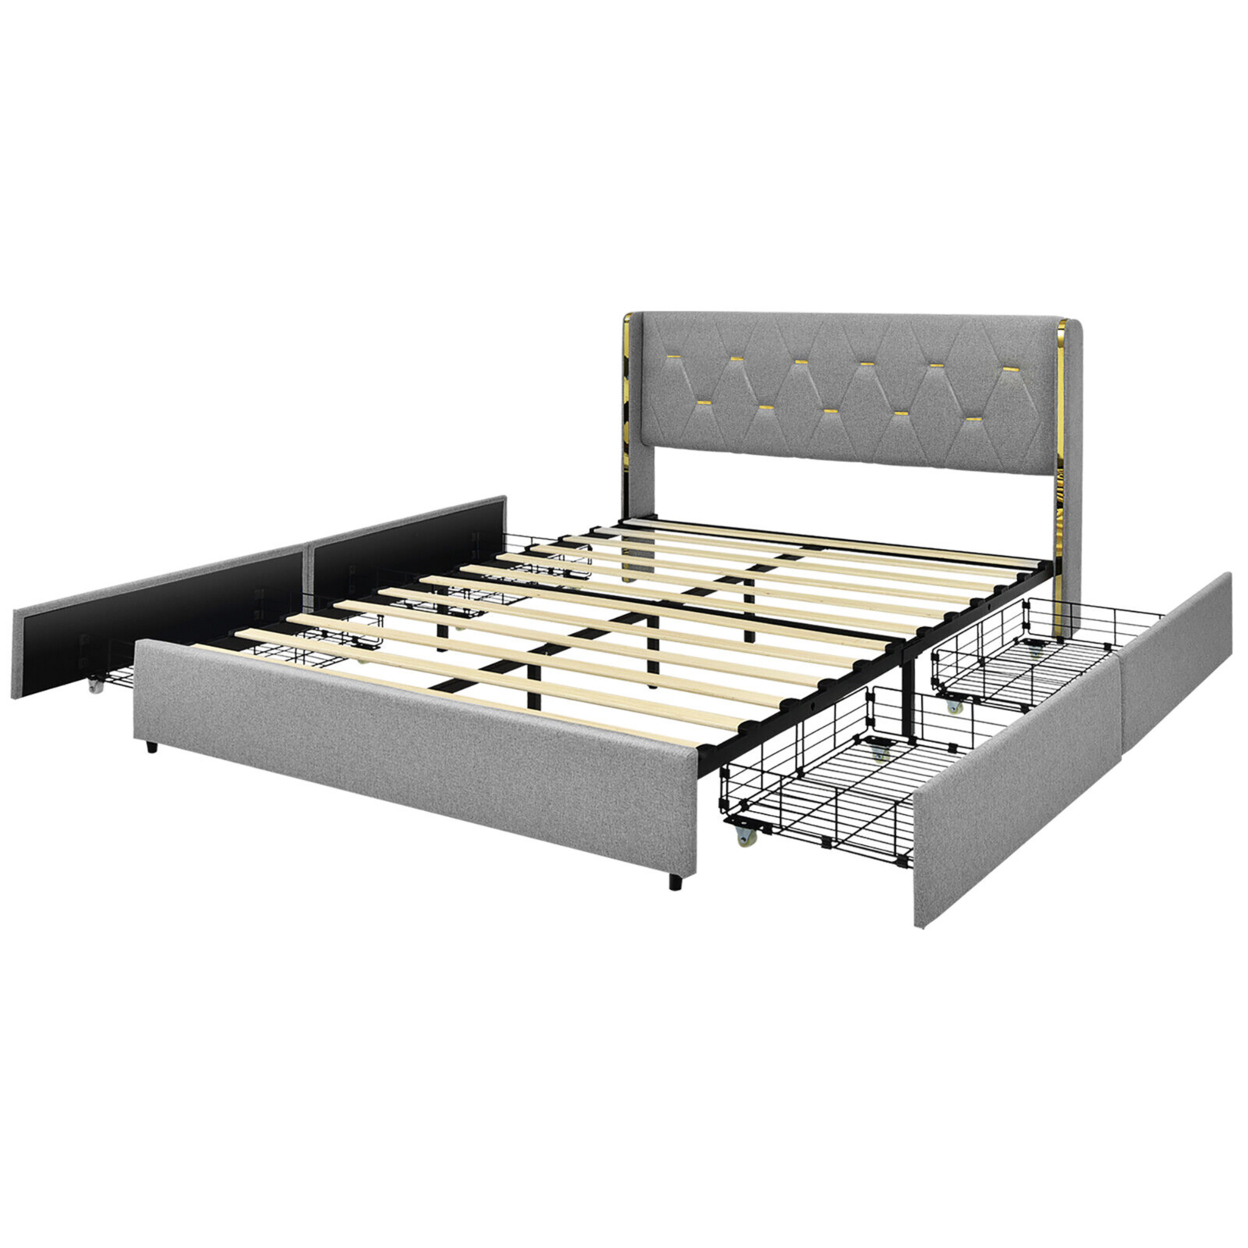 Gymax Queen Bed Frame Mattress Foundation With 4 Storage Drawers Silver